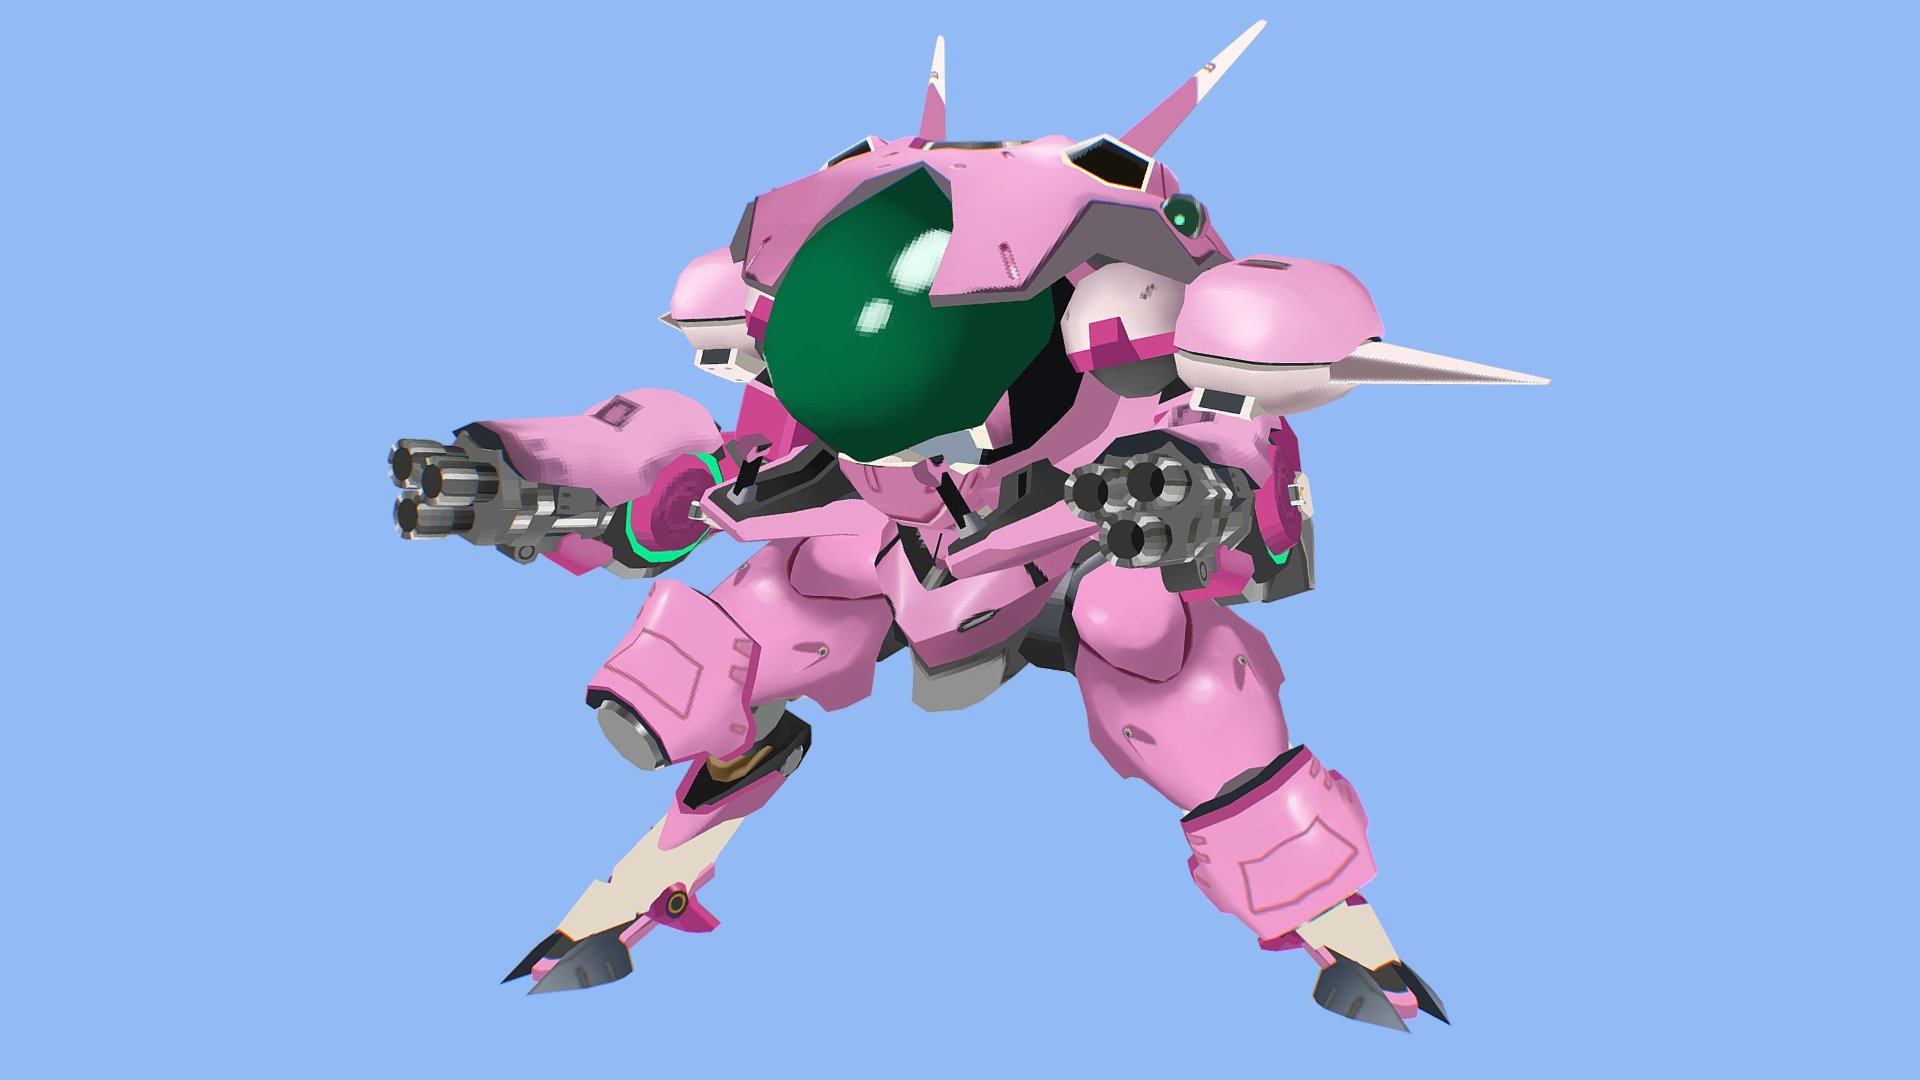 D.Va's MEKA unit, from Overwatch. Texture is 1024x1024.
Opacity map would also make the windshield semi-transparent, but doesn't translate well 3d model